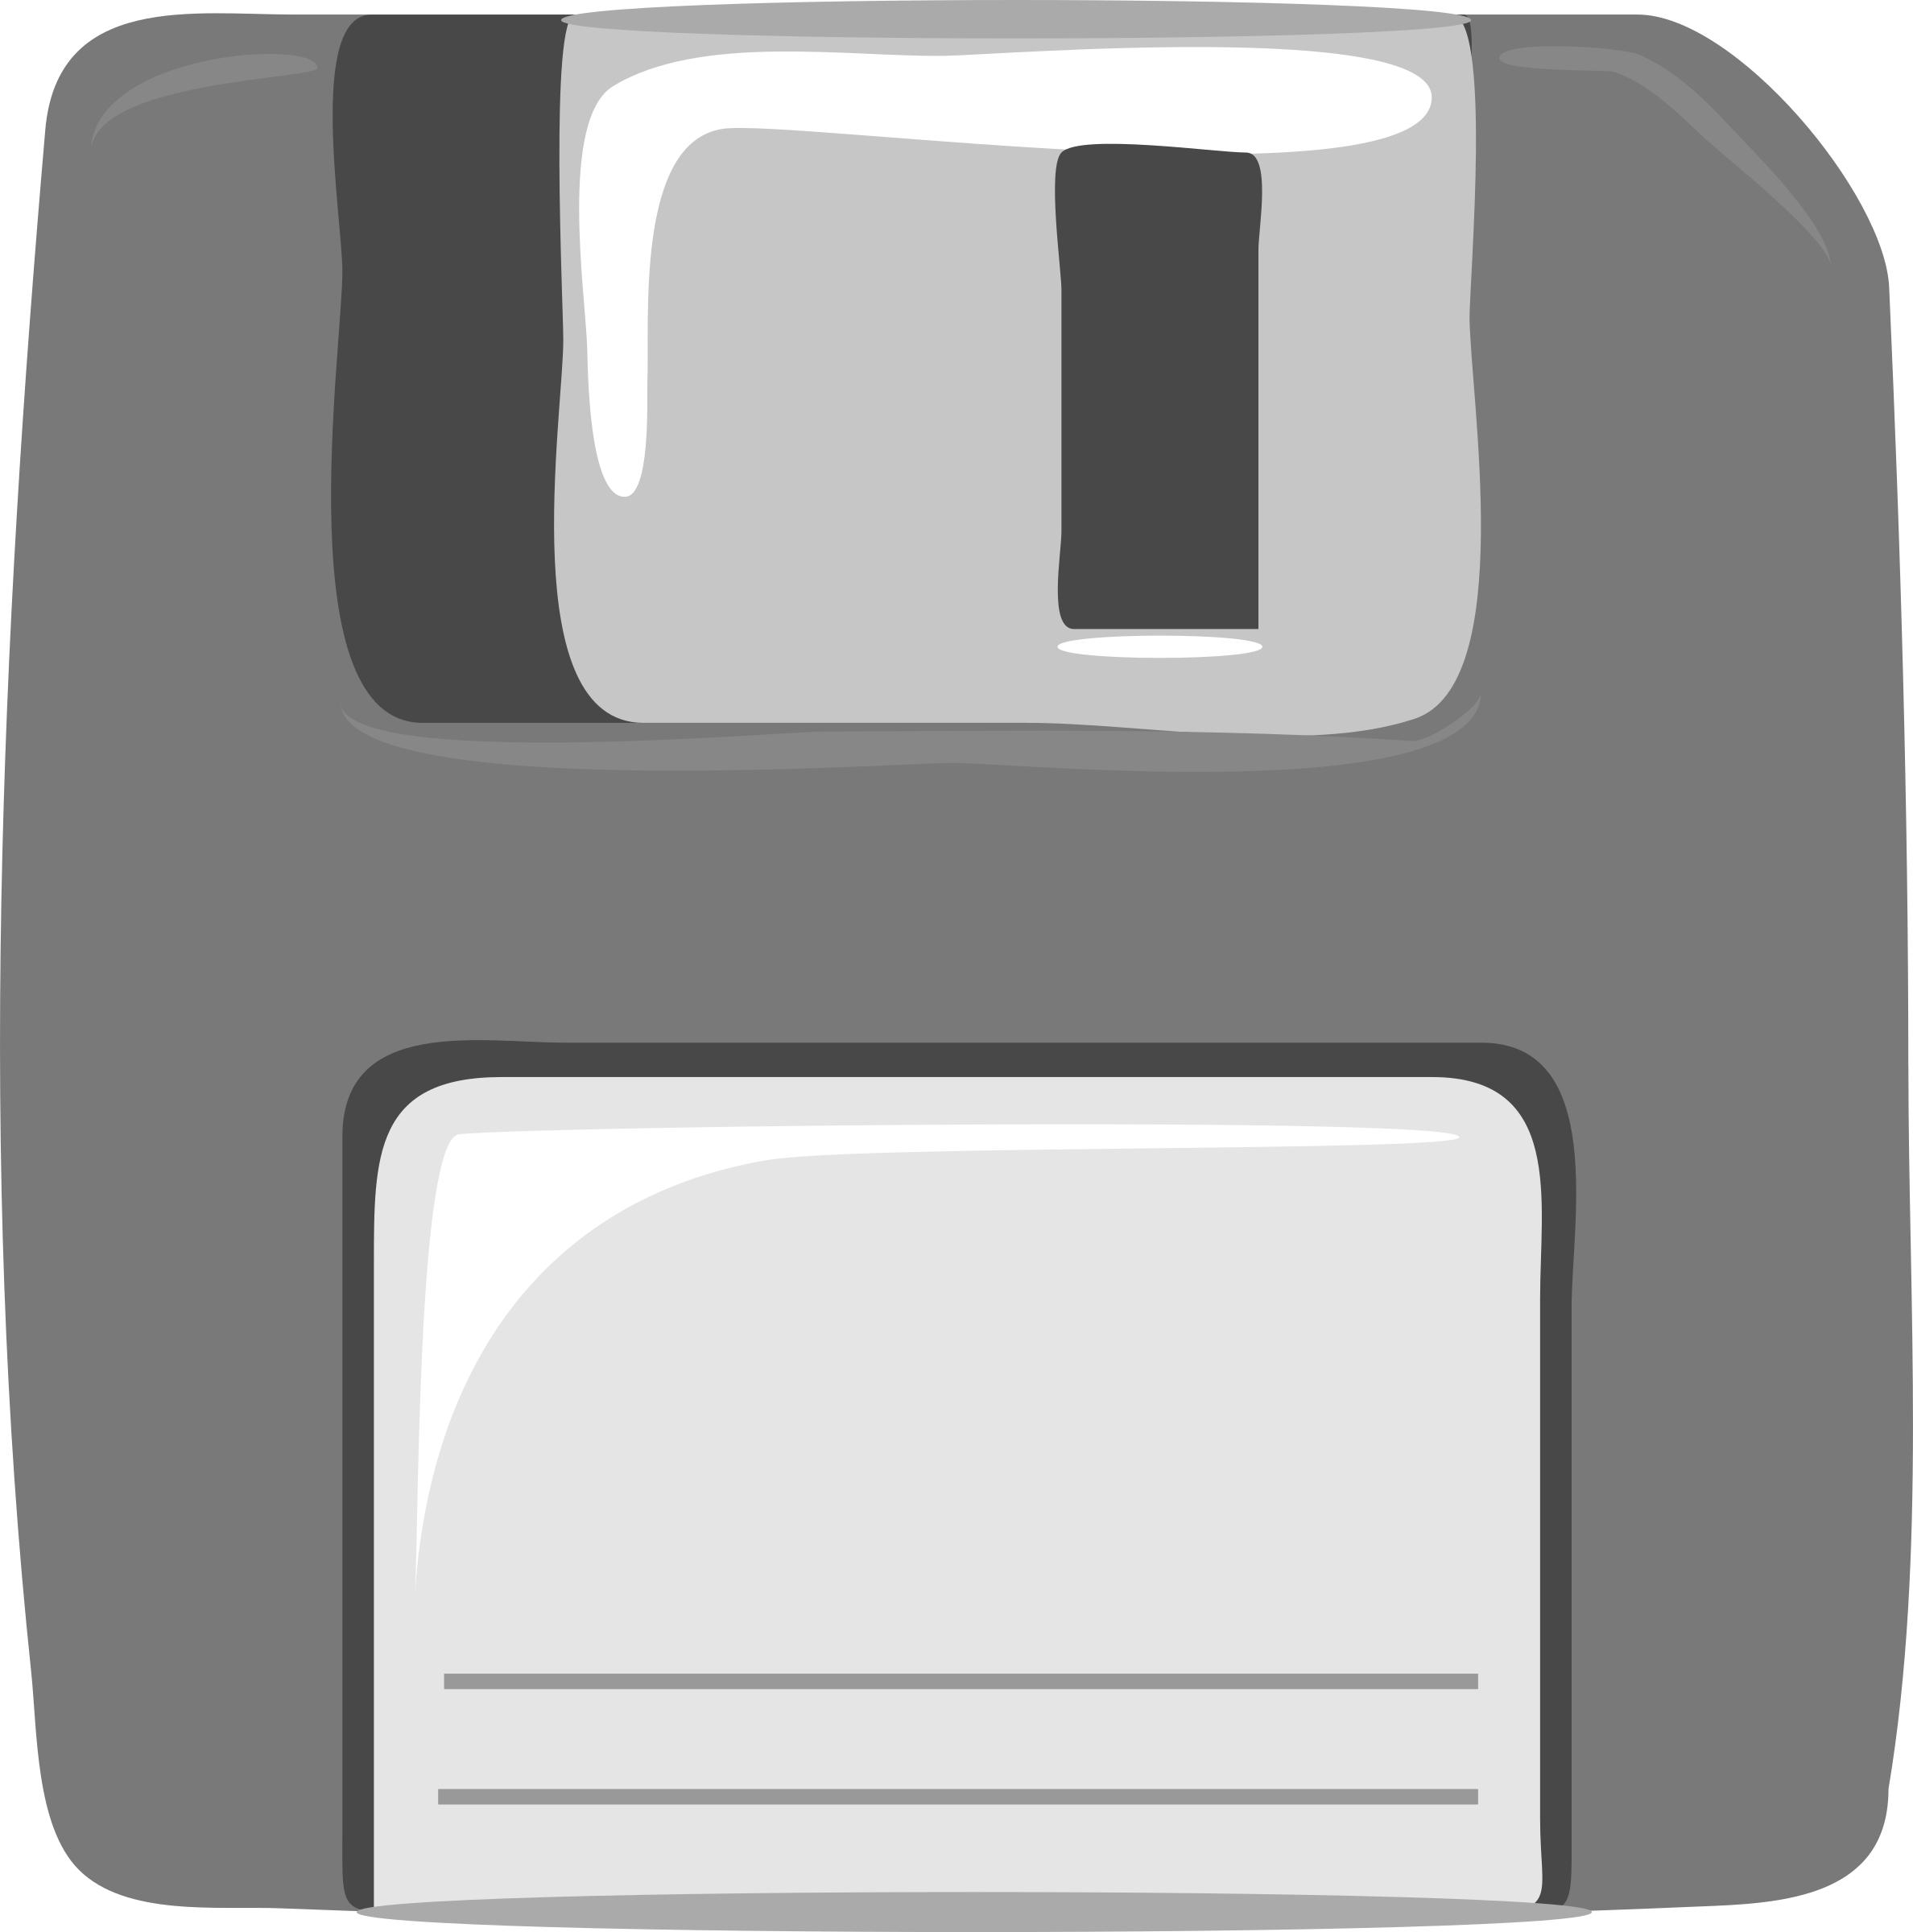 Architetto -- Floppy disk png